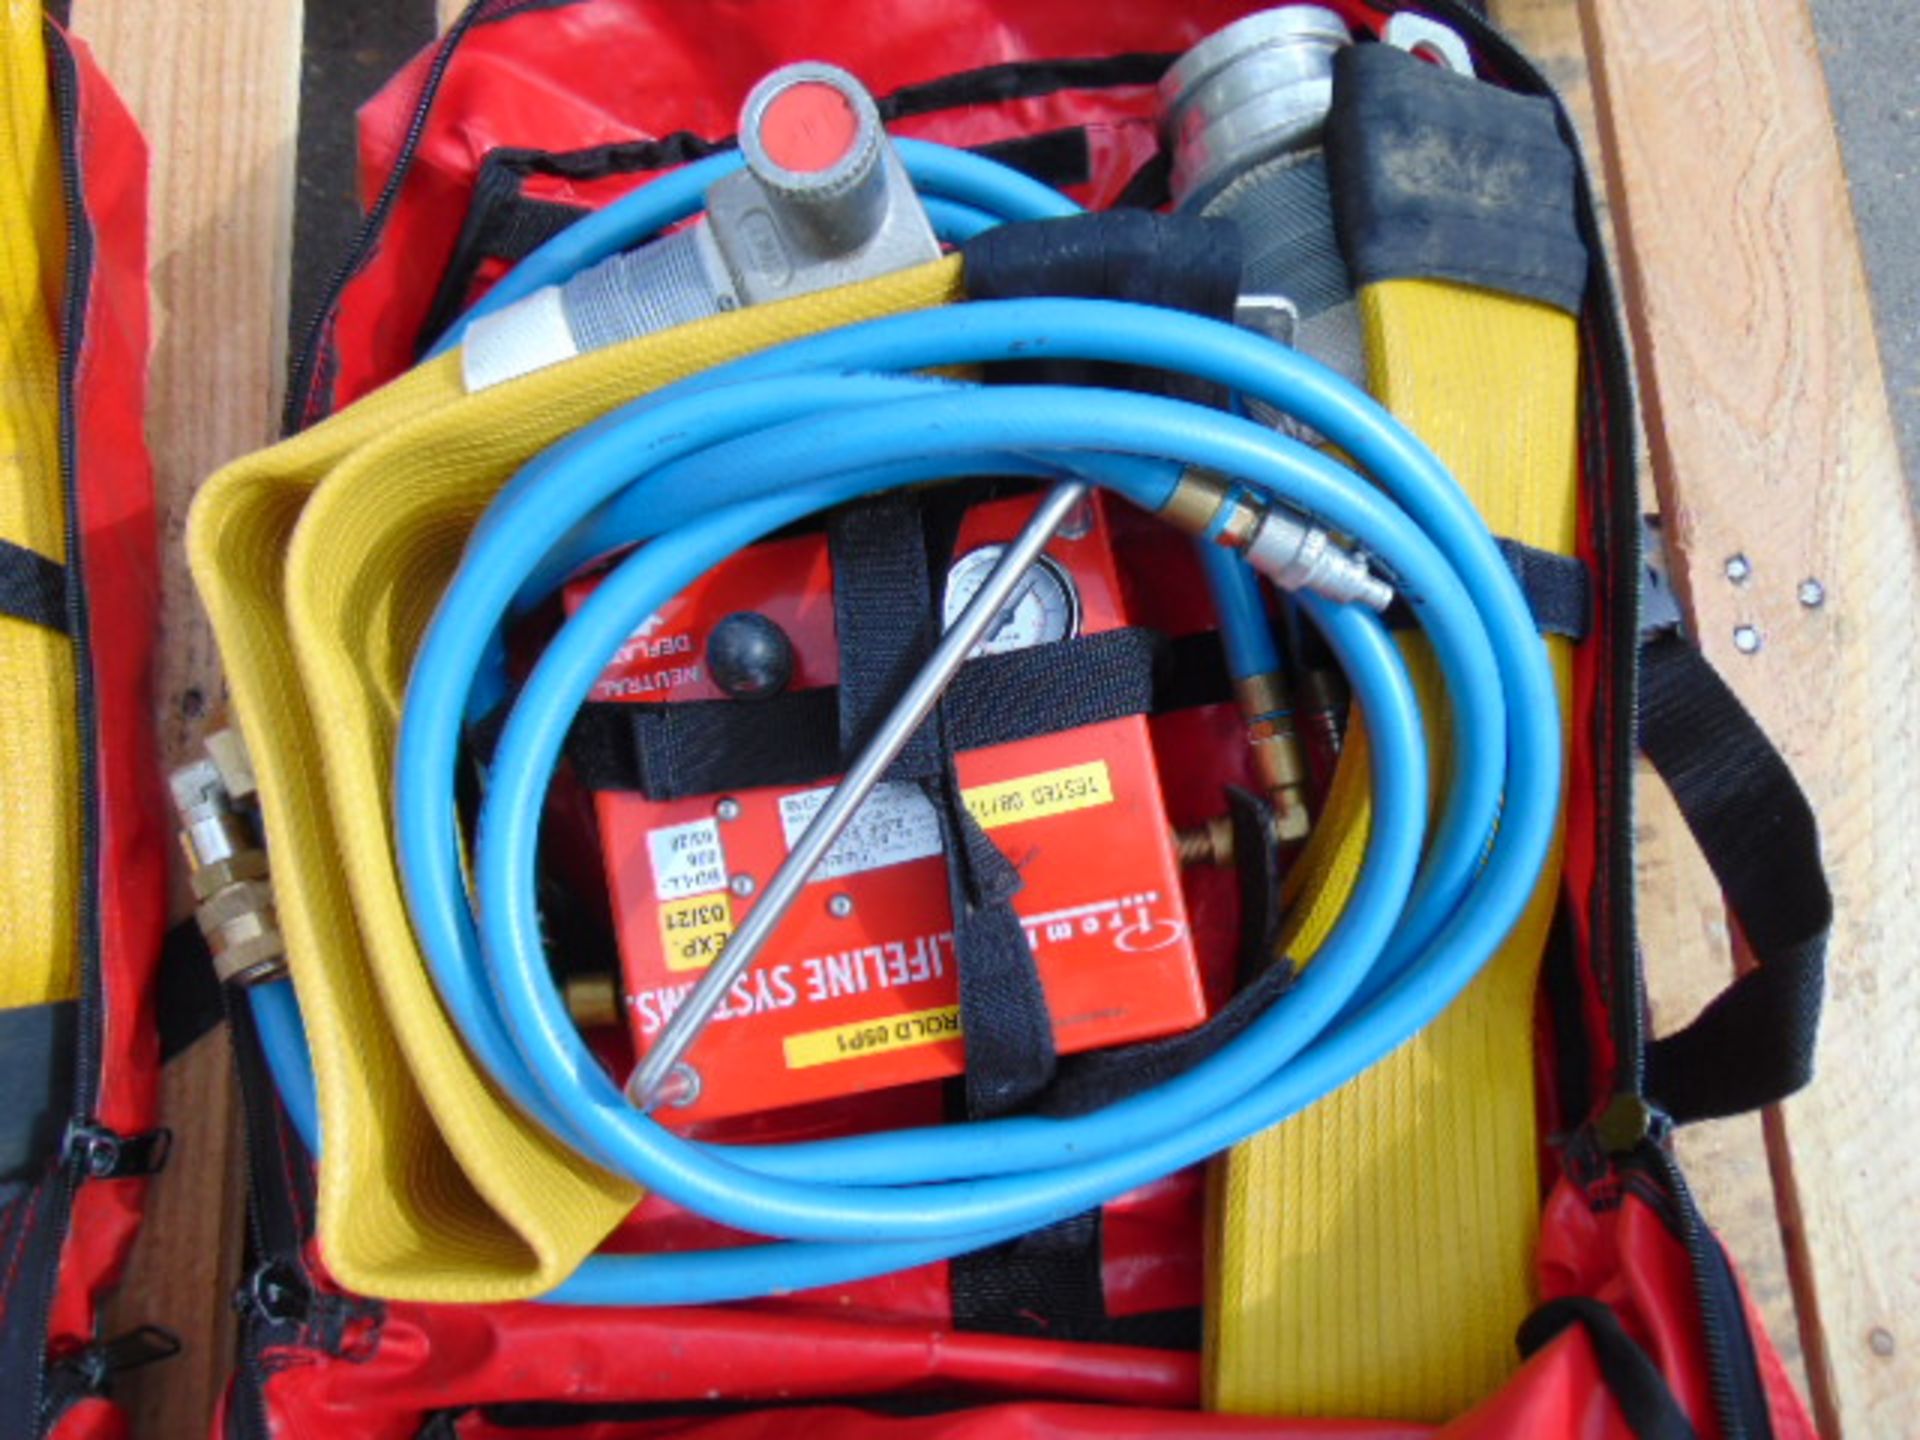 QTY 2 x Premier Lifeline Hose Inflation Systems - Image 3 of 6